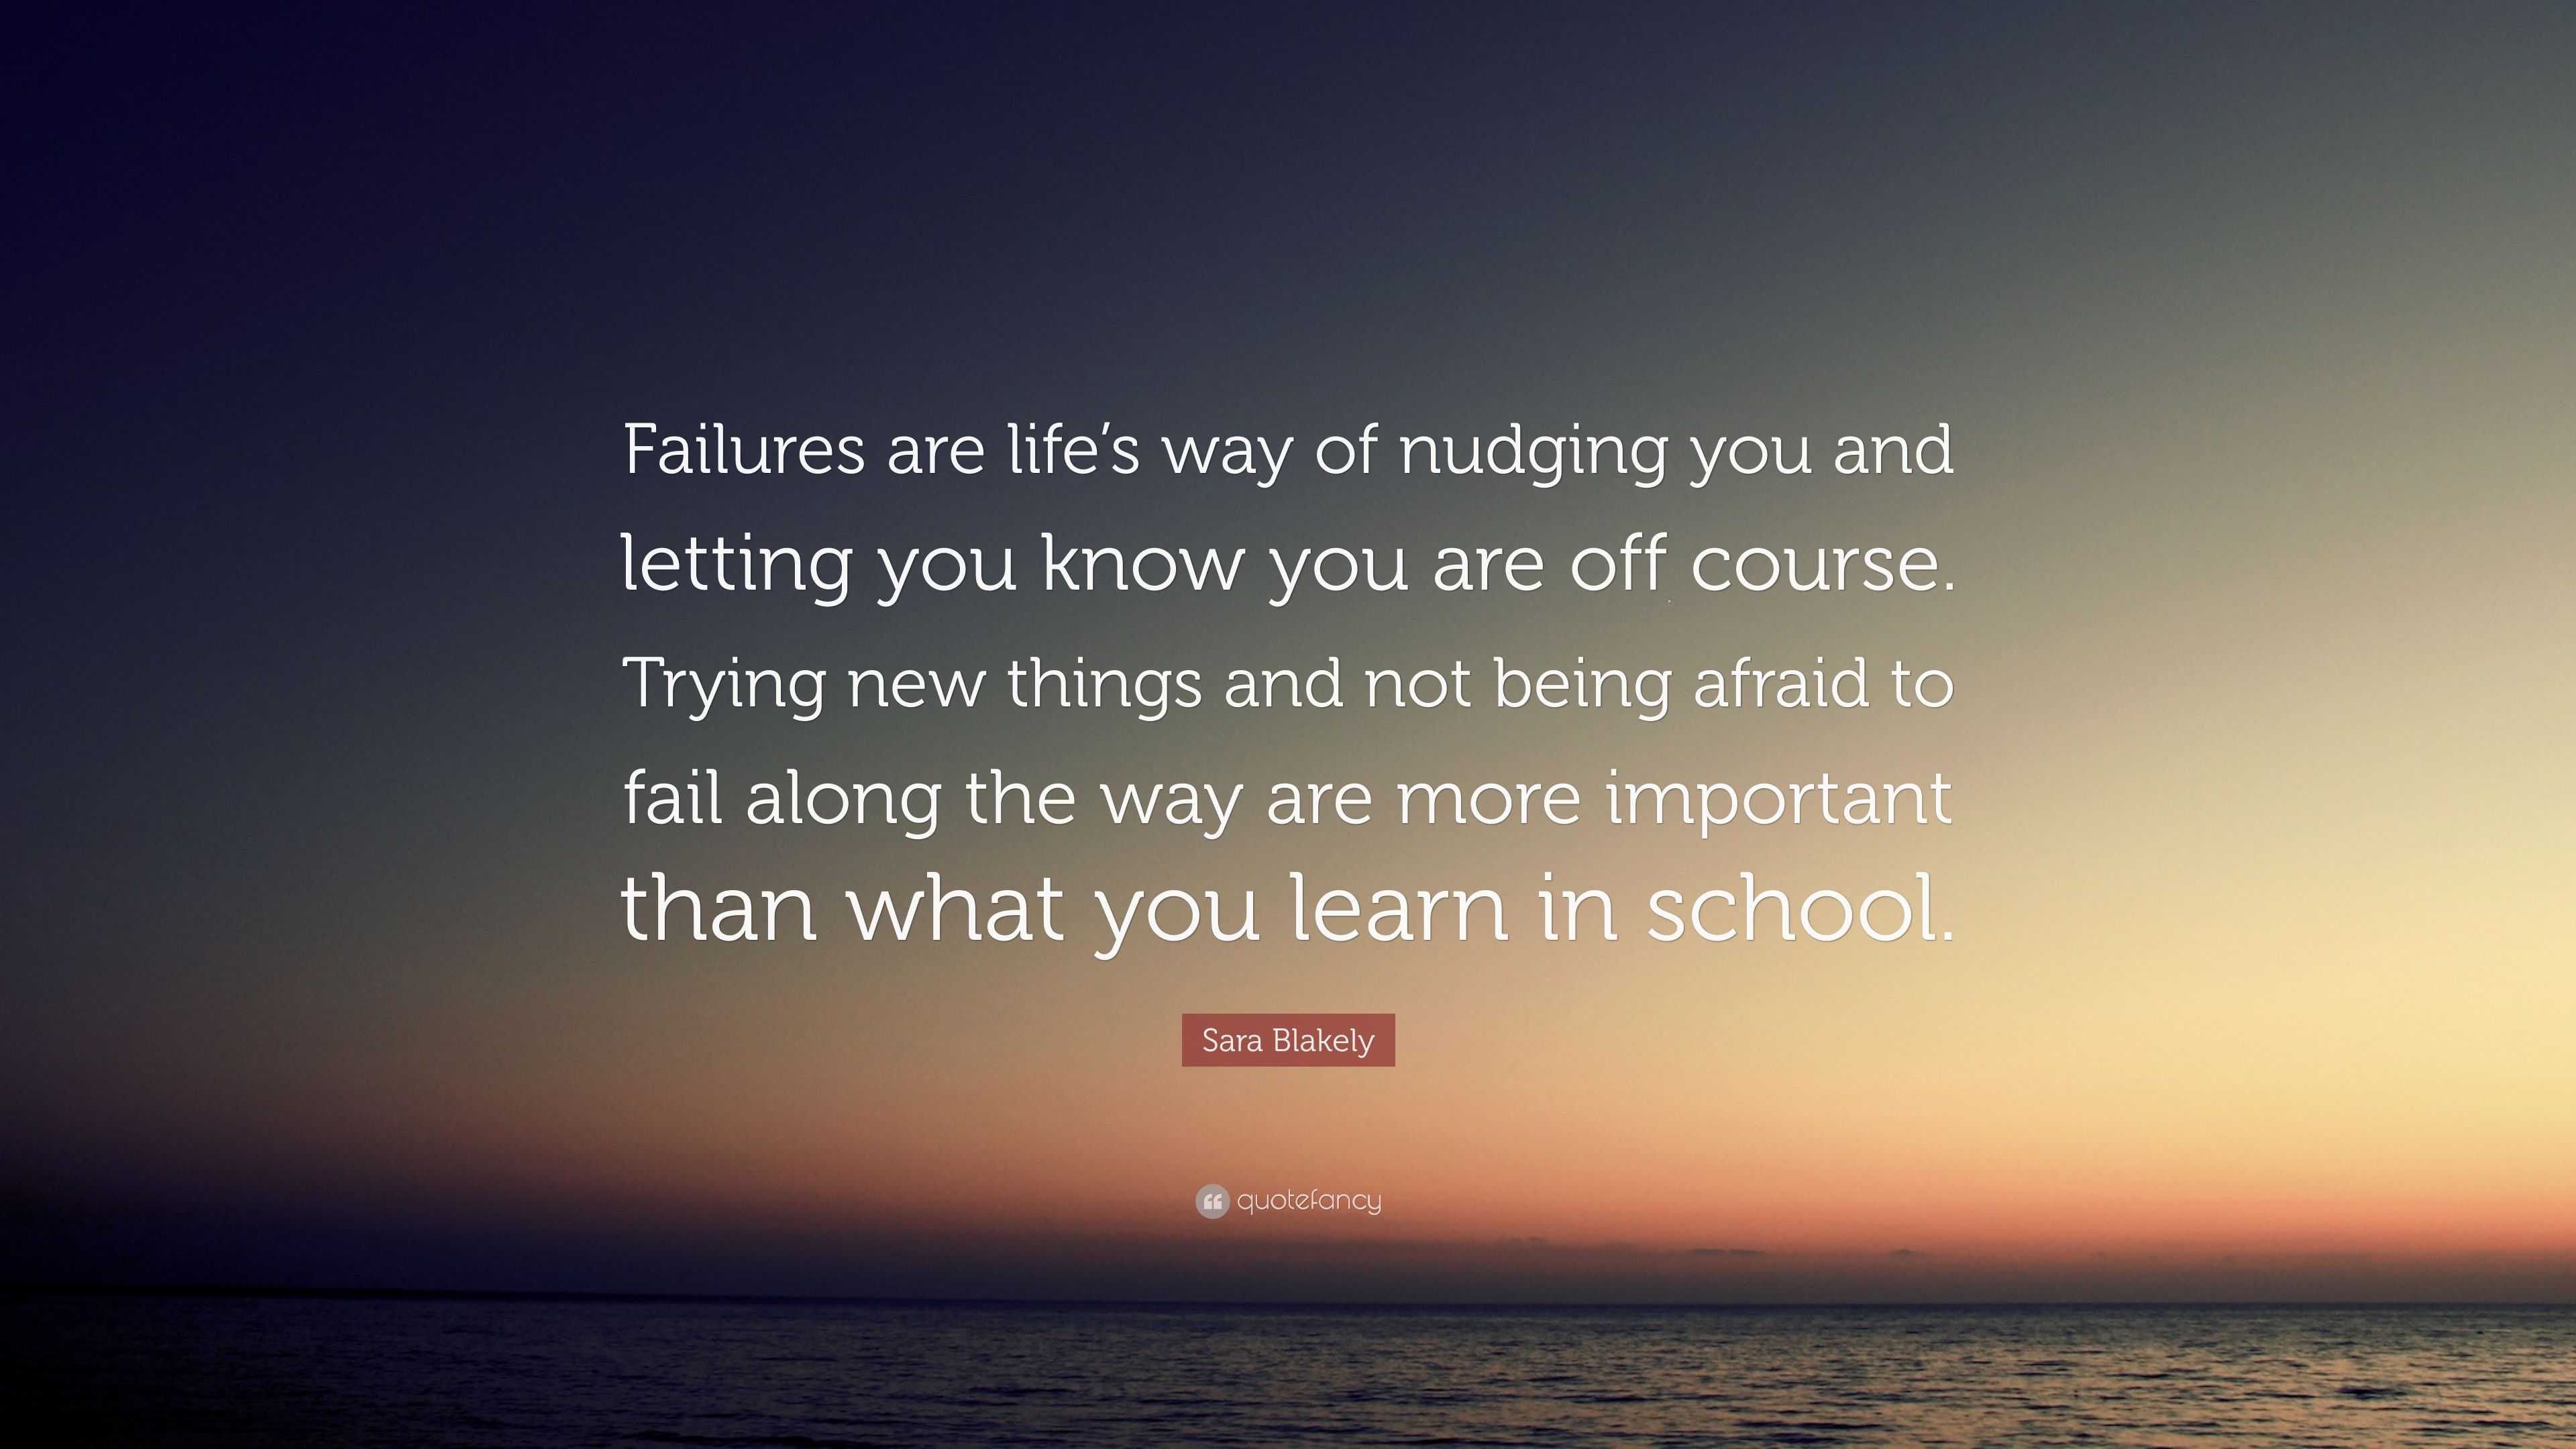 Sara Blakely Quote: “Failures are life’s way of nudging you and letting ...